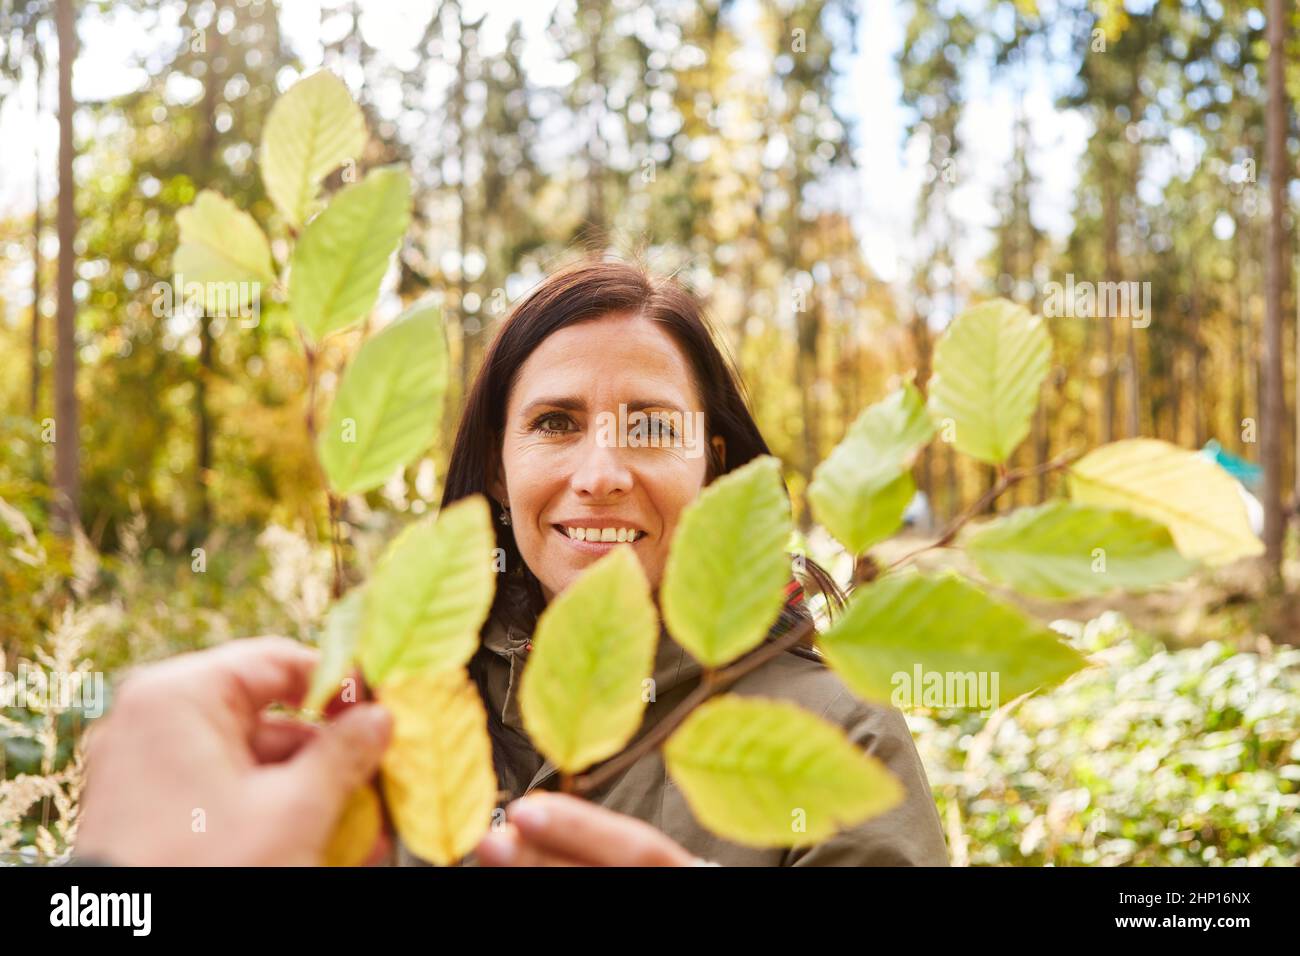 Woman holding leaves while choosing climate change tree for climate protection and sustainability Stock Photo